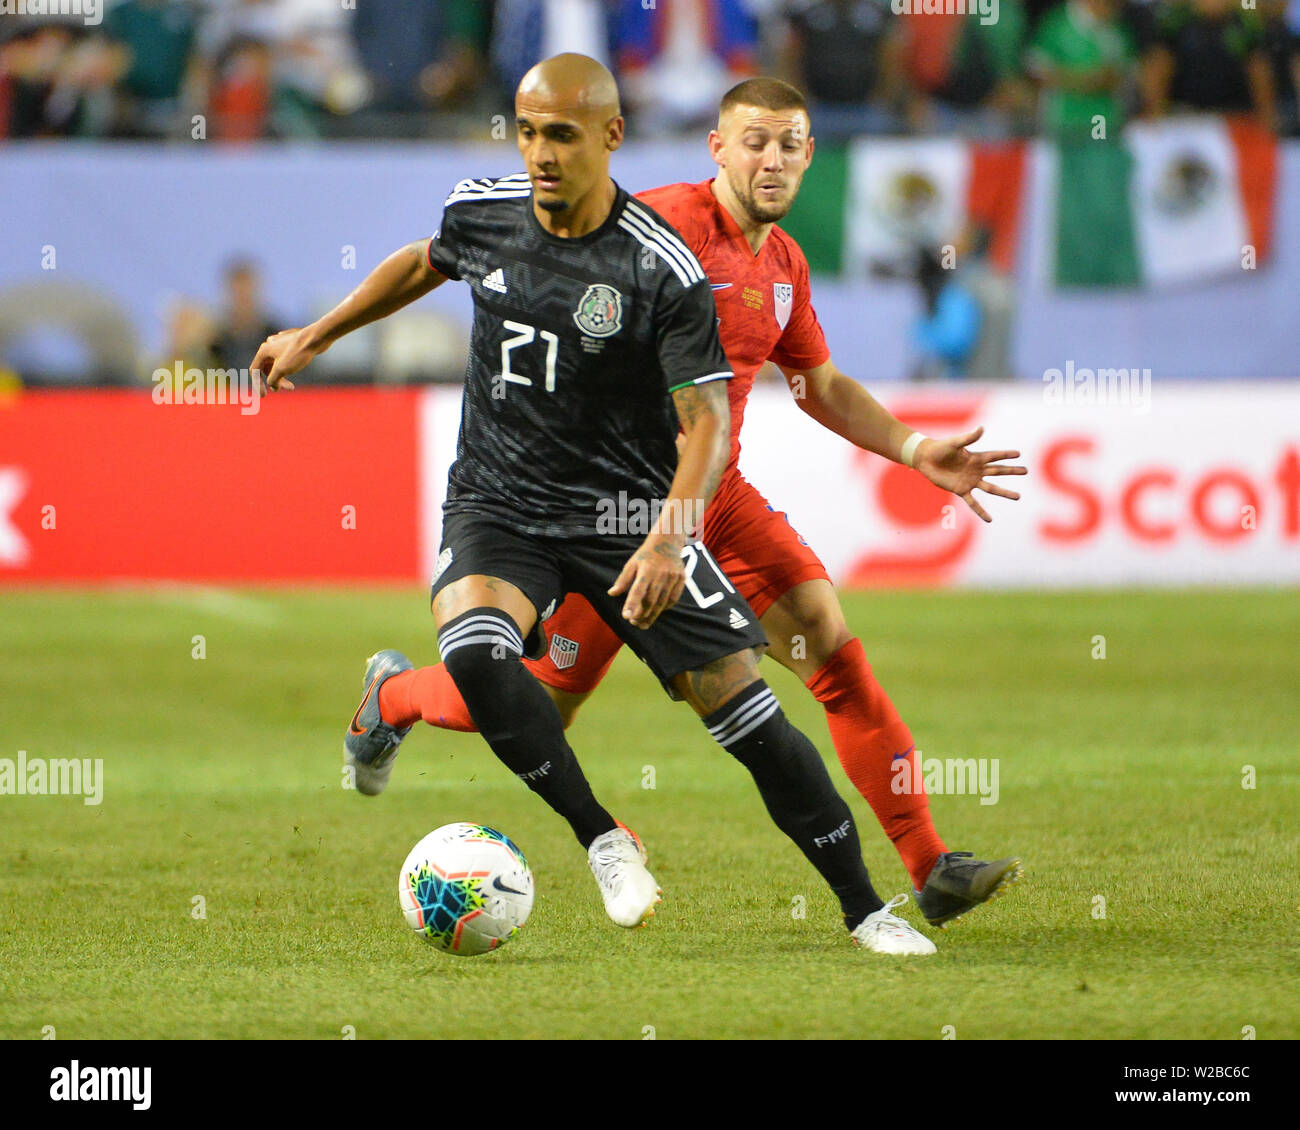 Chicago, IL, USA. 07th July, 2019. Mexico defender, Luis Rodriguez (21), moves the ball downfield as US midfielder, Michael Bradley (4), follows behind. during the 2019 CONCACAF Gold Cup, championship match, between the United States and Mexico, at Soldier Field in Chicago, IL. Credit: Kevin Langley/CSM/Alamy Live News Stock Photo